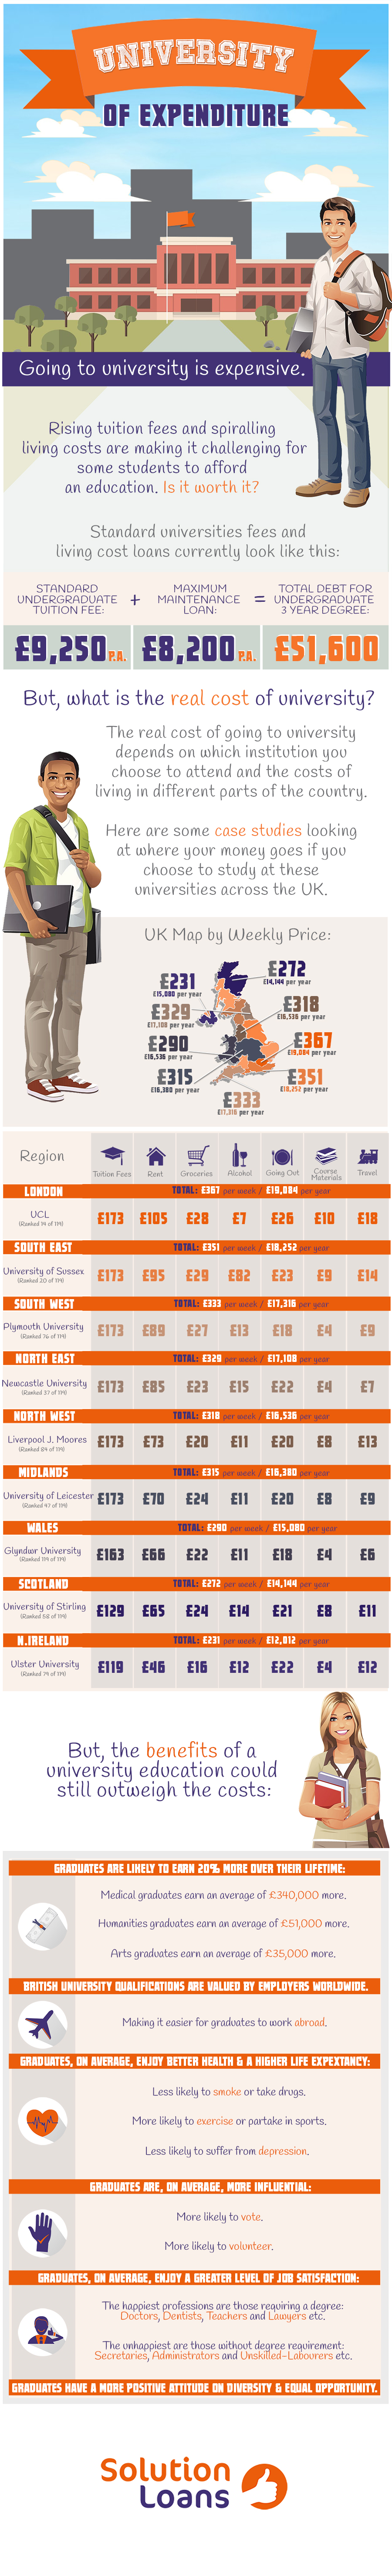 infographic-university-is-expensive1